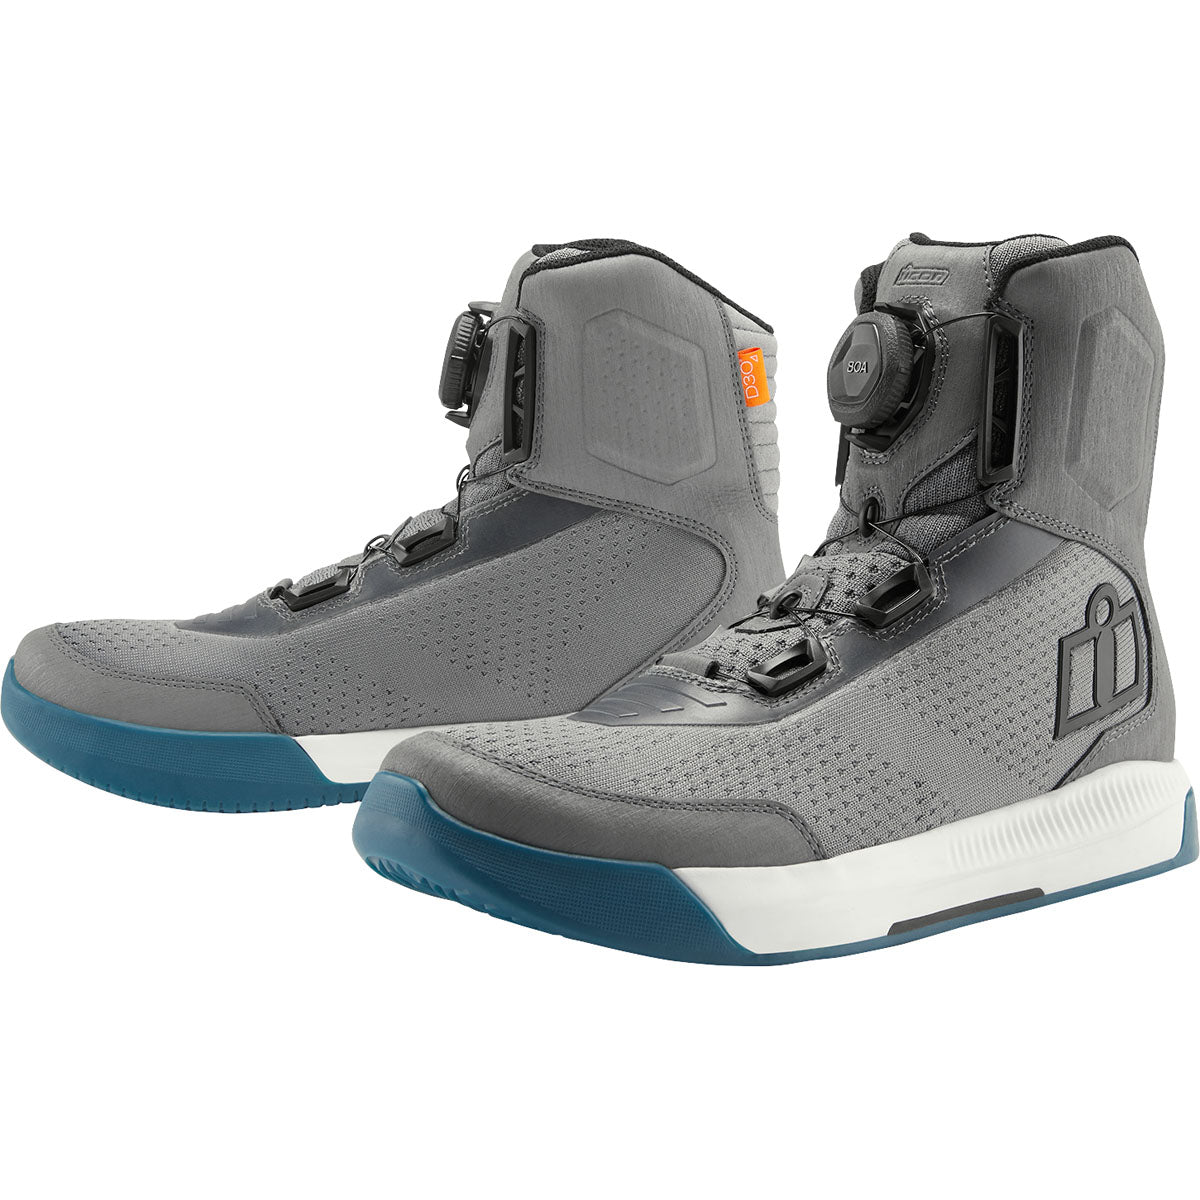 Icon Overlord Vented Waterproof CE Boots - Grey